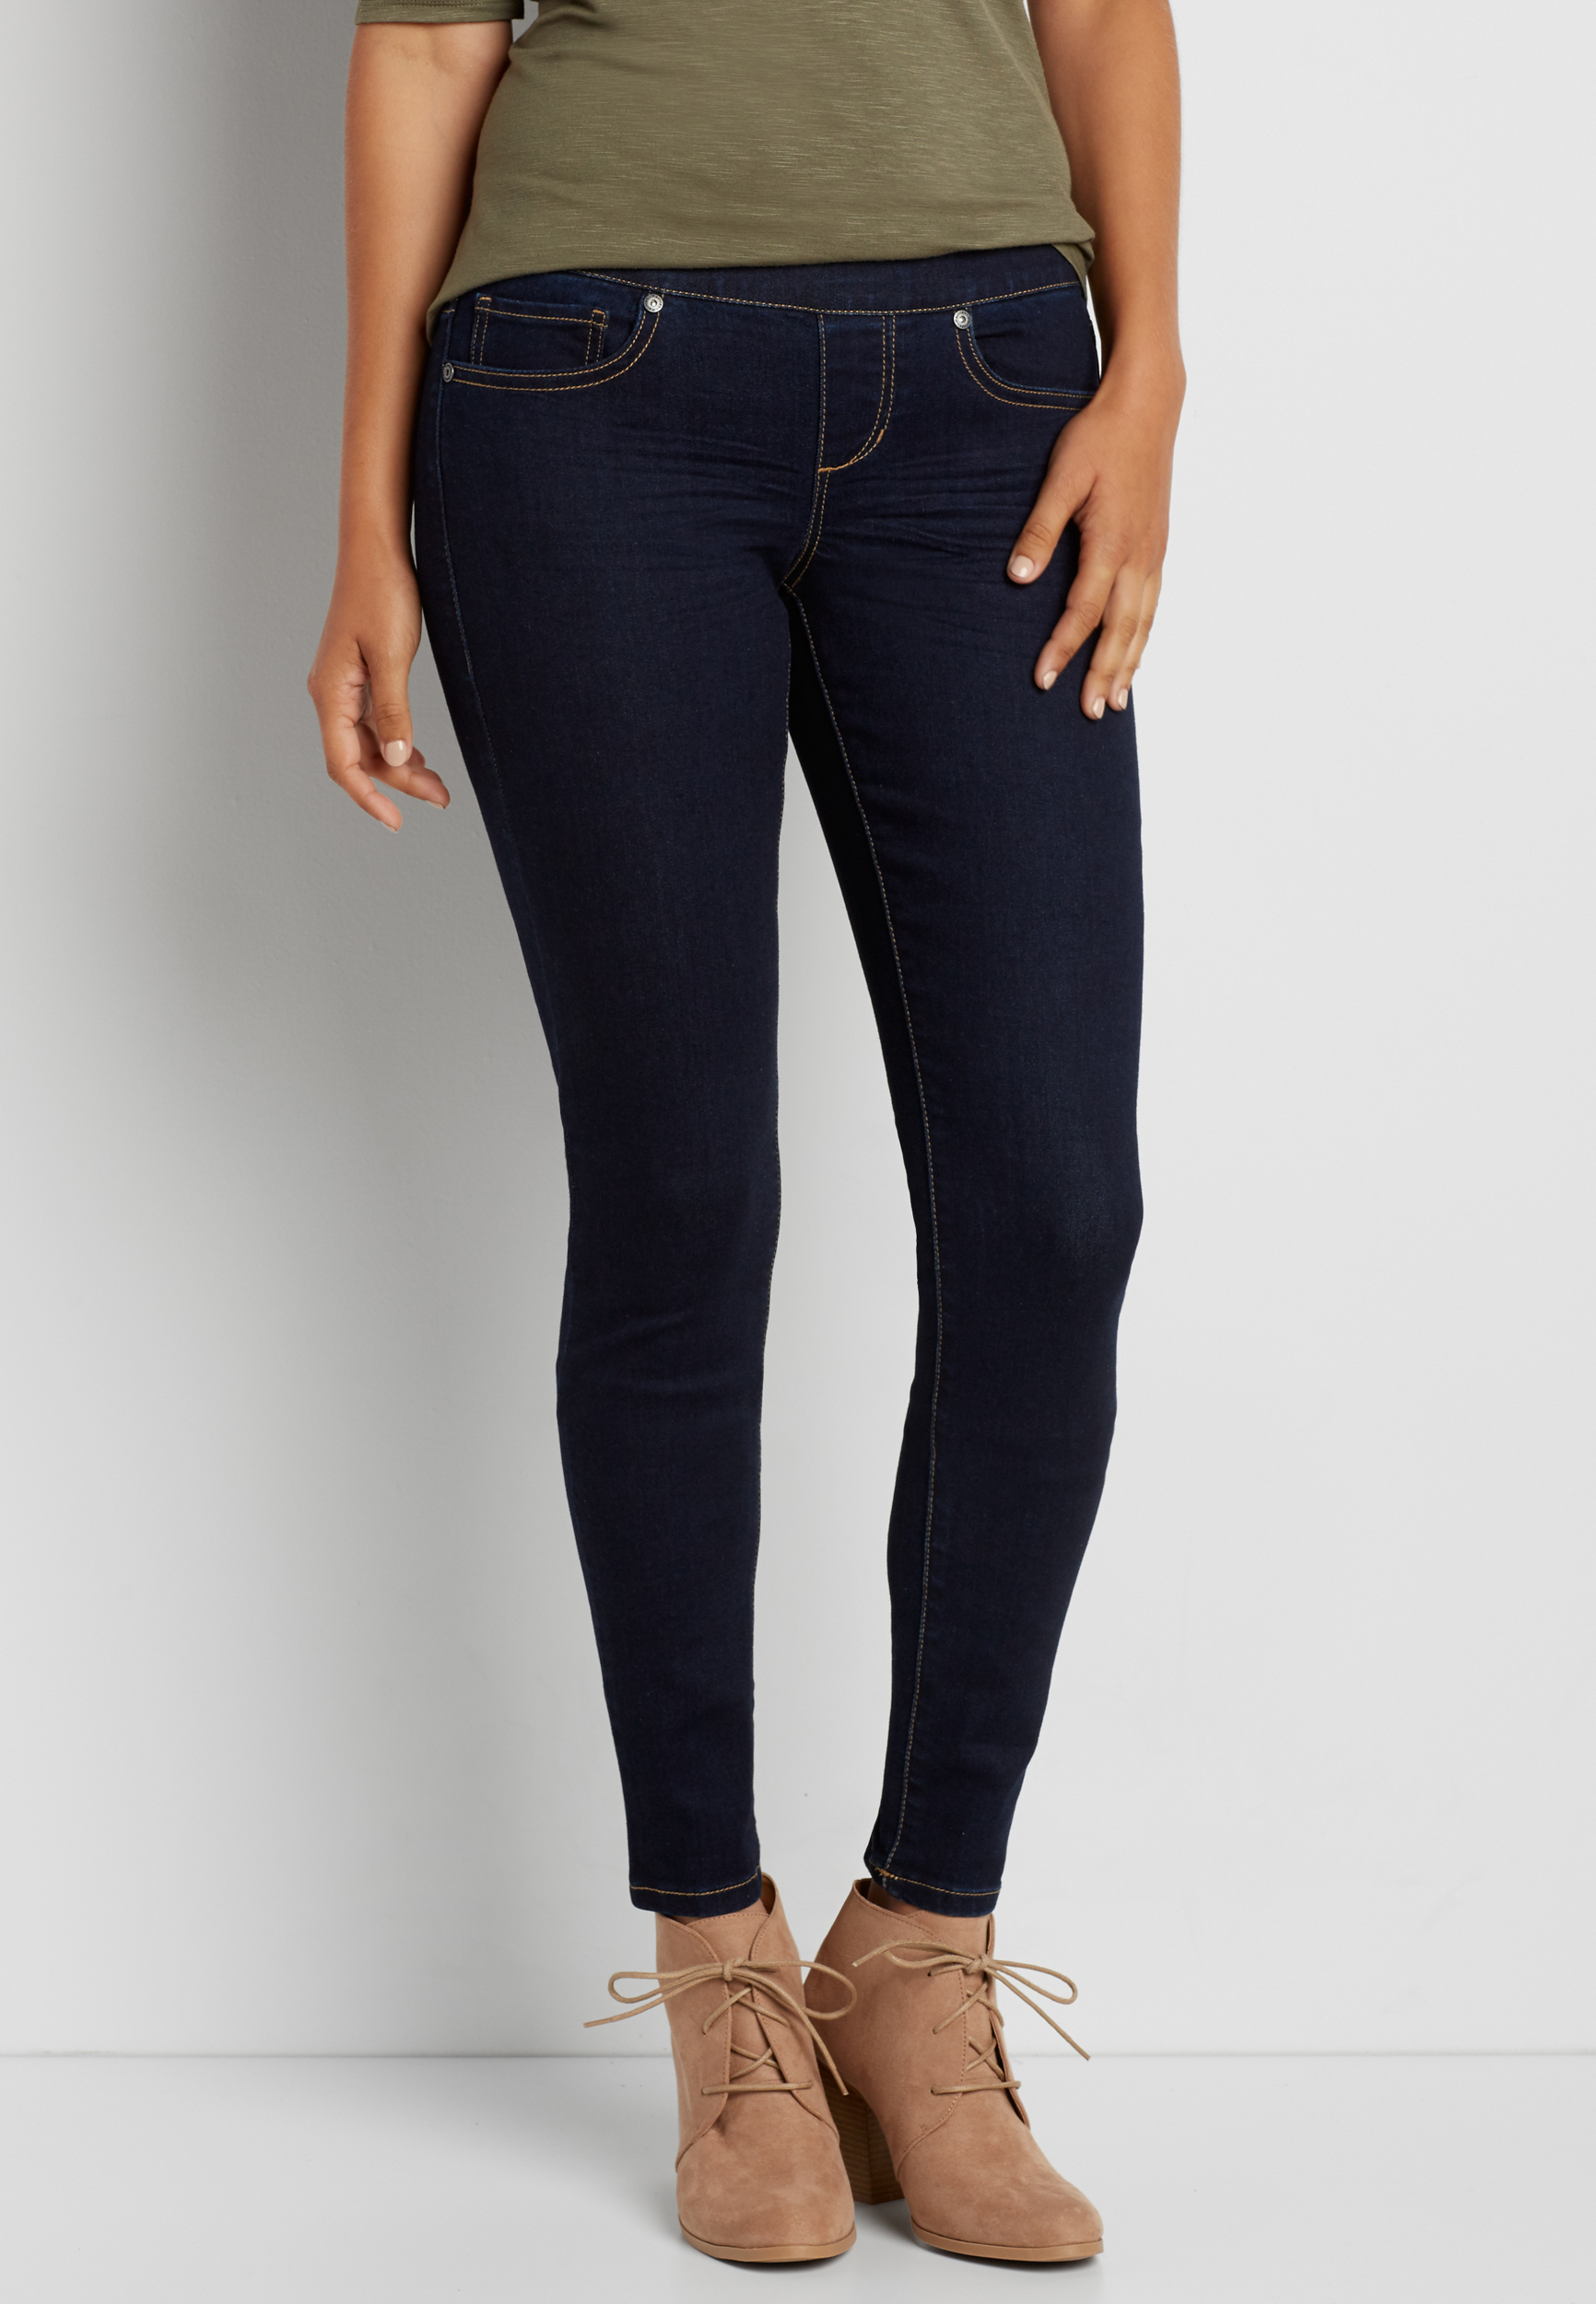 DenimFlex™ pull on jegging in dark wash with goldtone stitching | maurices